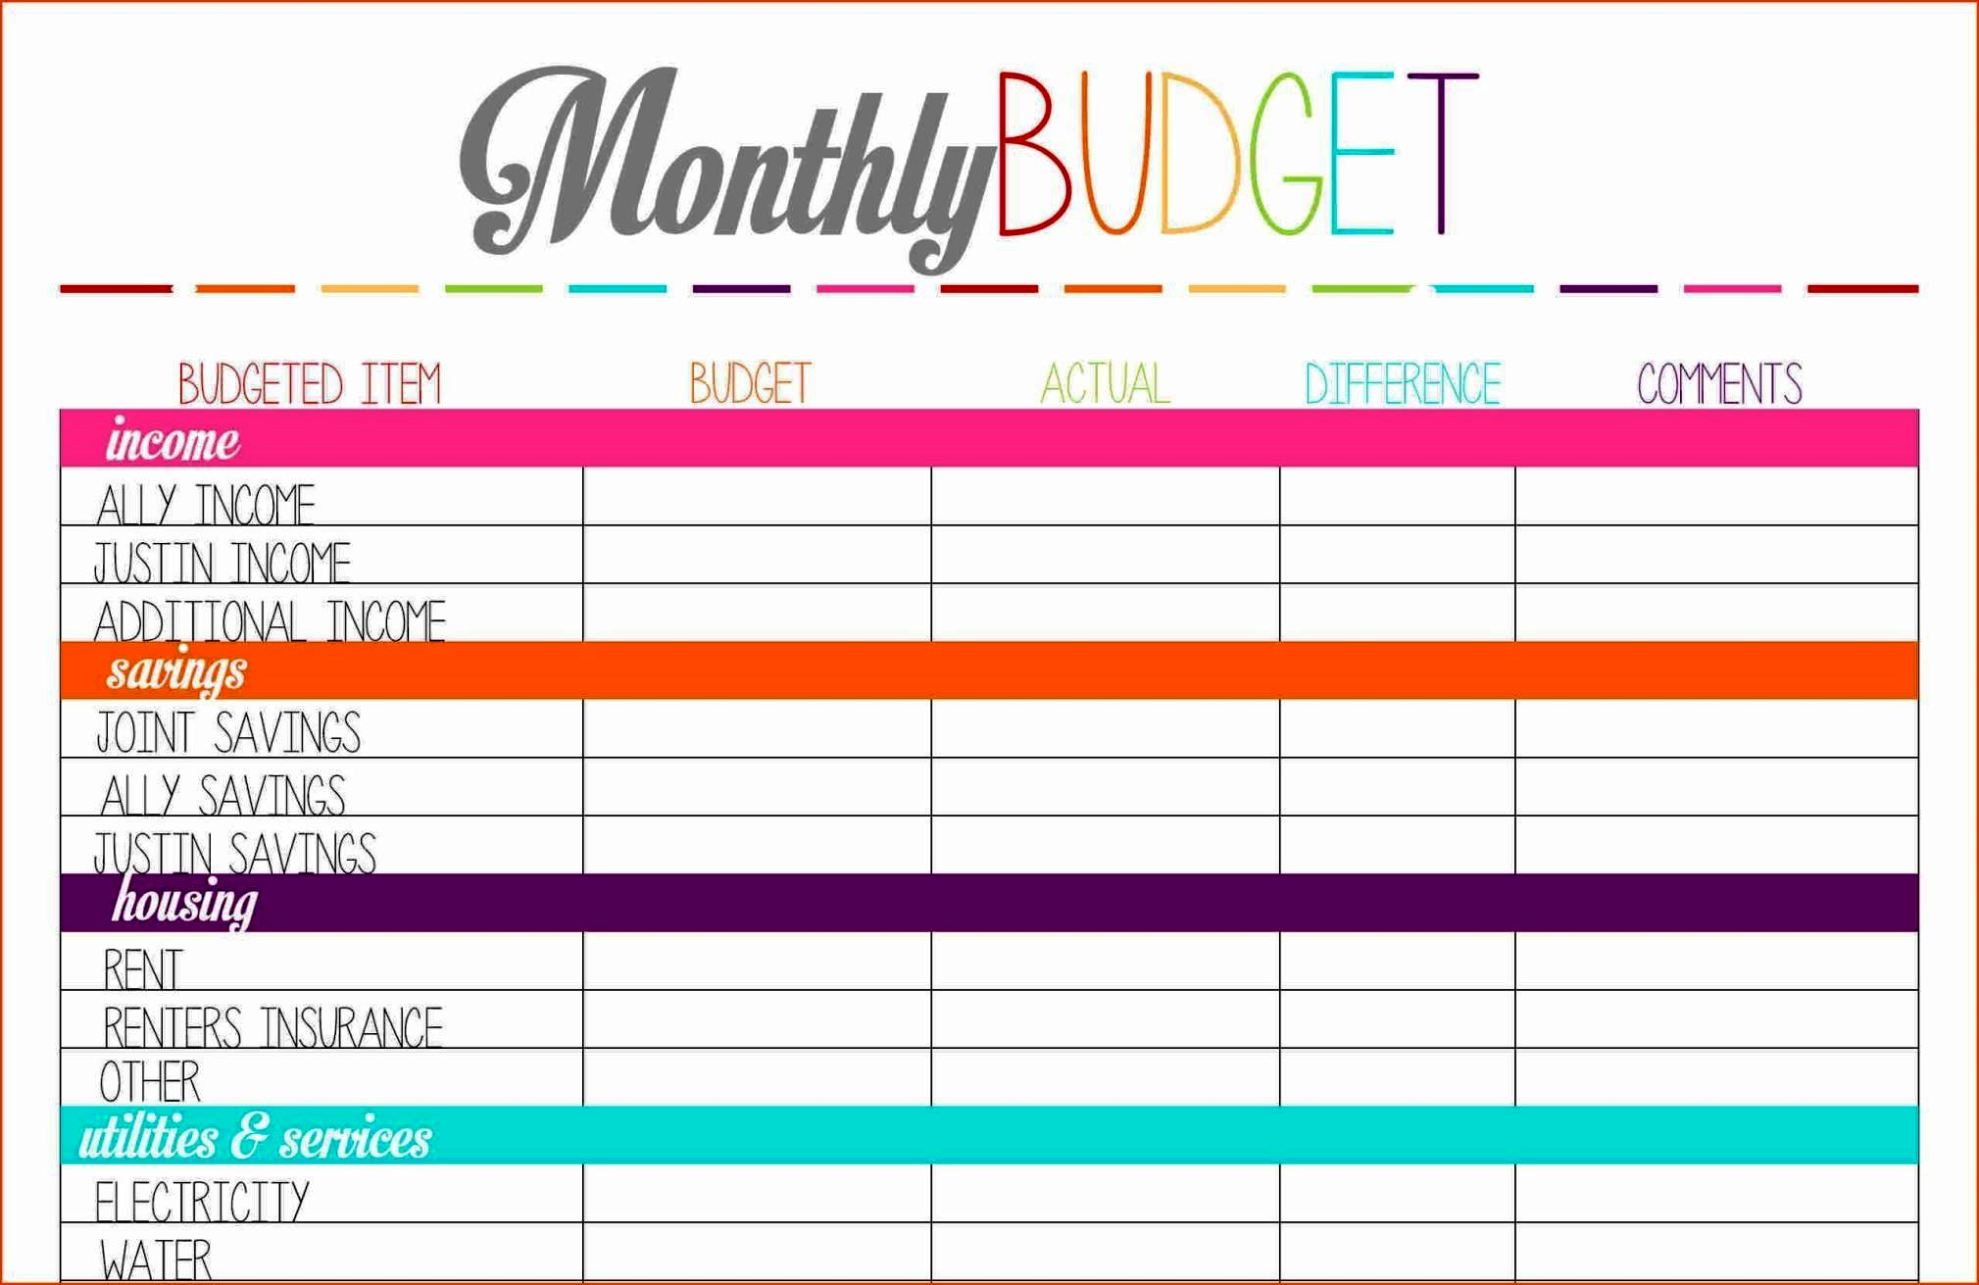 monthly-budget-forms-free-printable-free-printable-templates